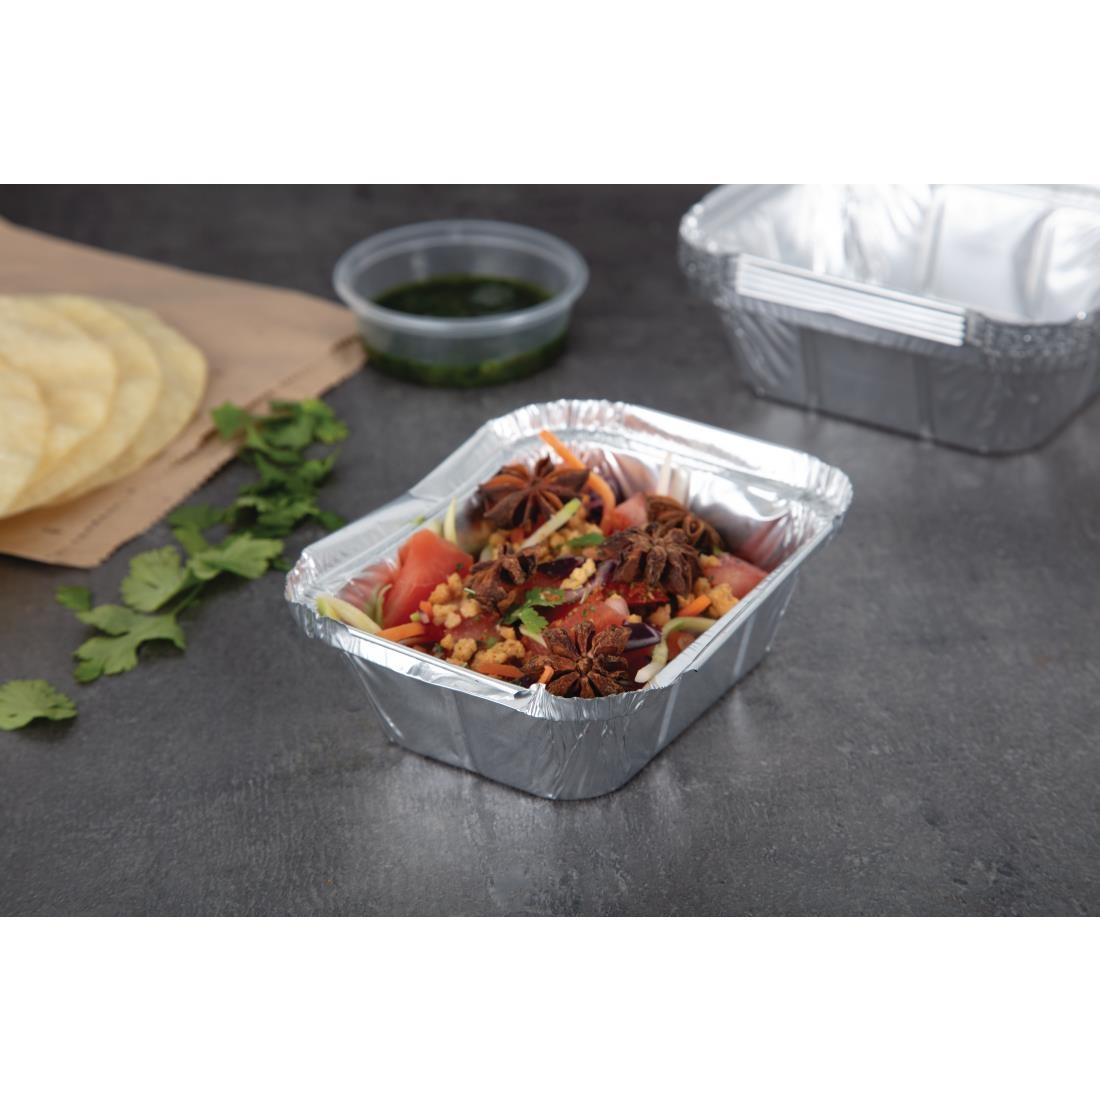 Fiesta Recyclable Foil Containers Small 260ml / 9oz (Pack of 1000) - CD947  - 7